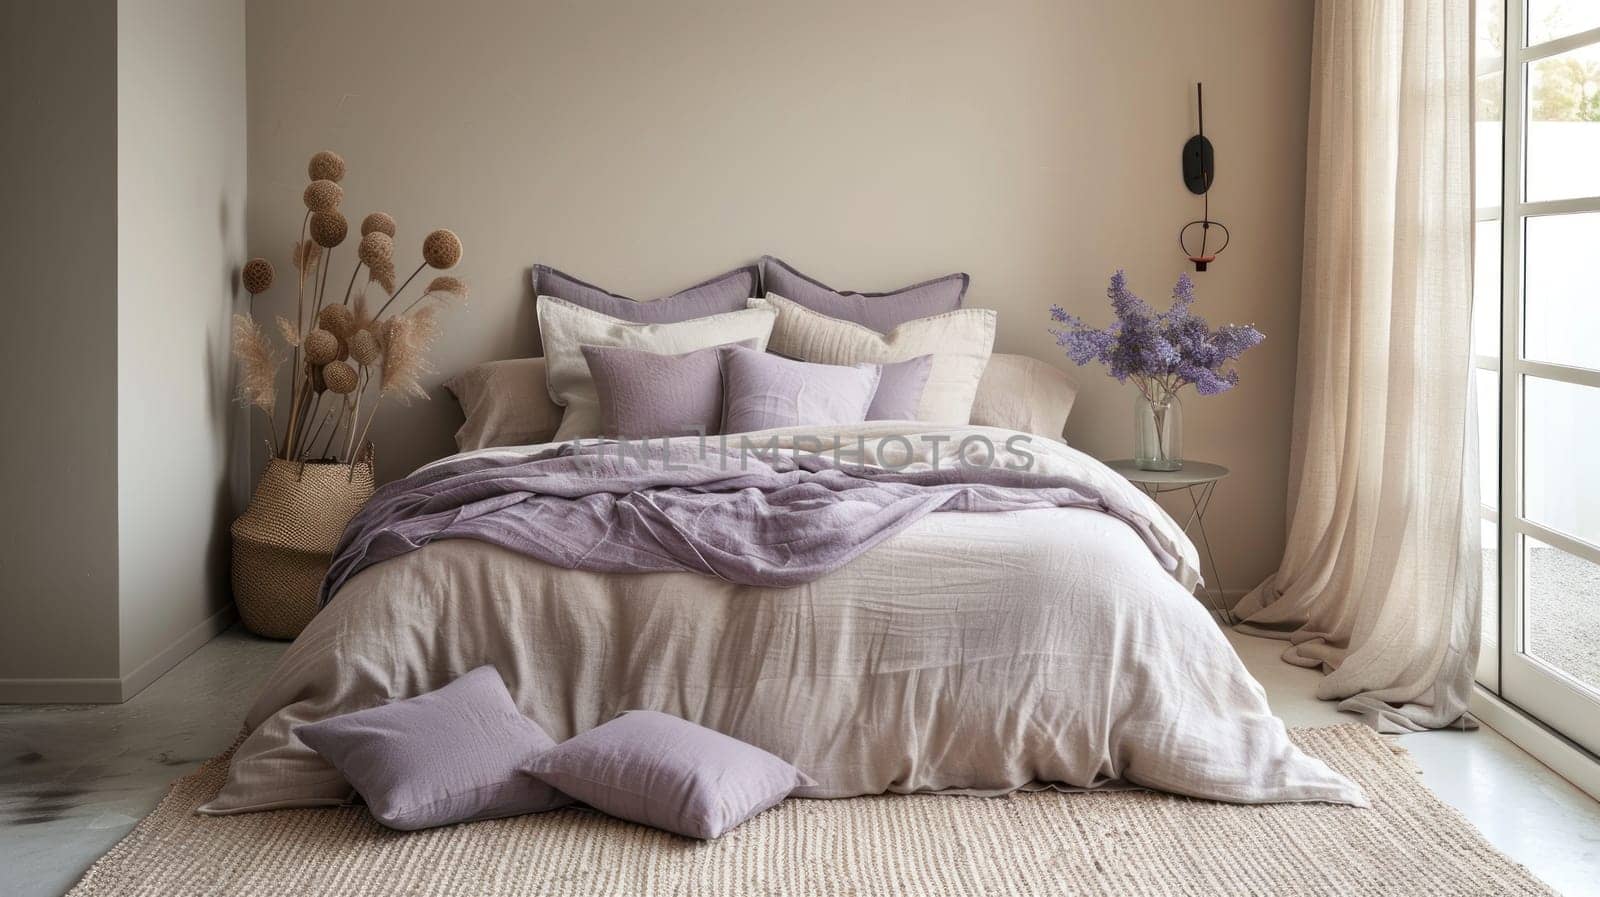 Peaceful Bedroom Design with Muted Colors Concept Light Taupe Bedding Soft Lavender Pillows and Neutral-Toned Rug Creating a Cohesive Relaxing Environment.